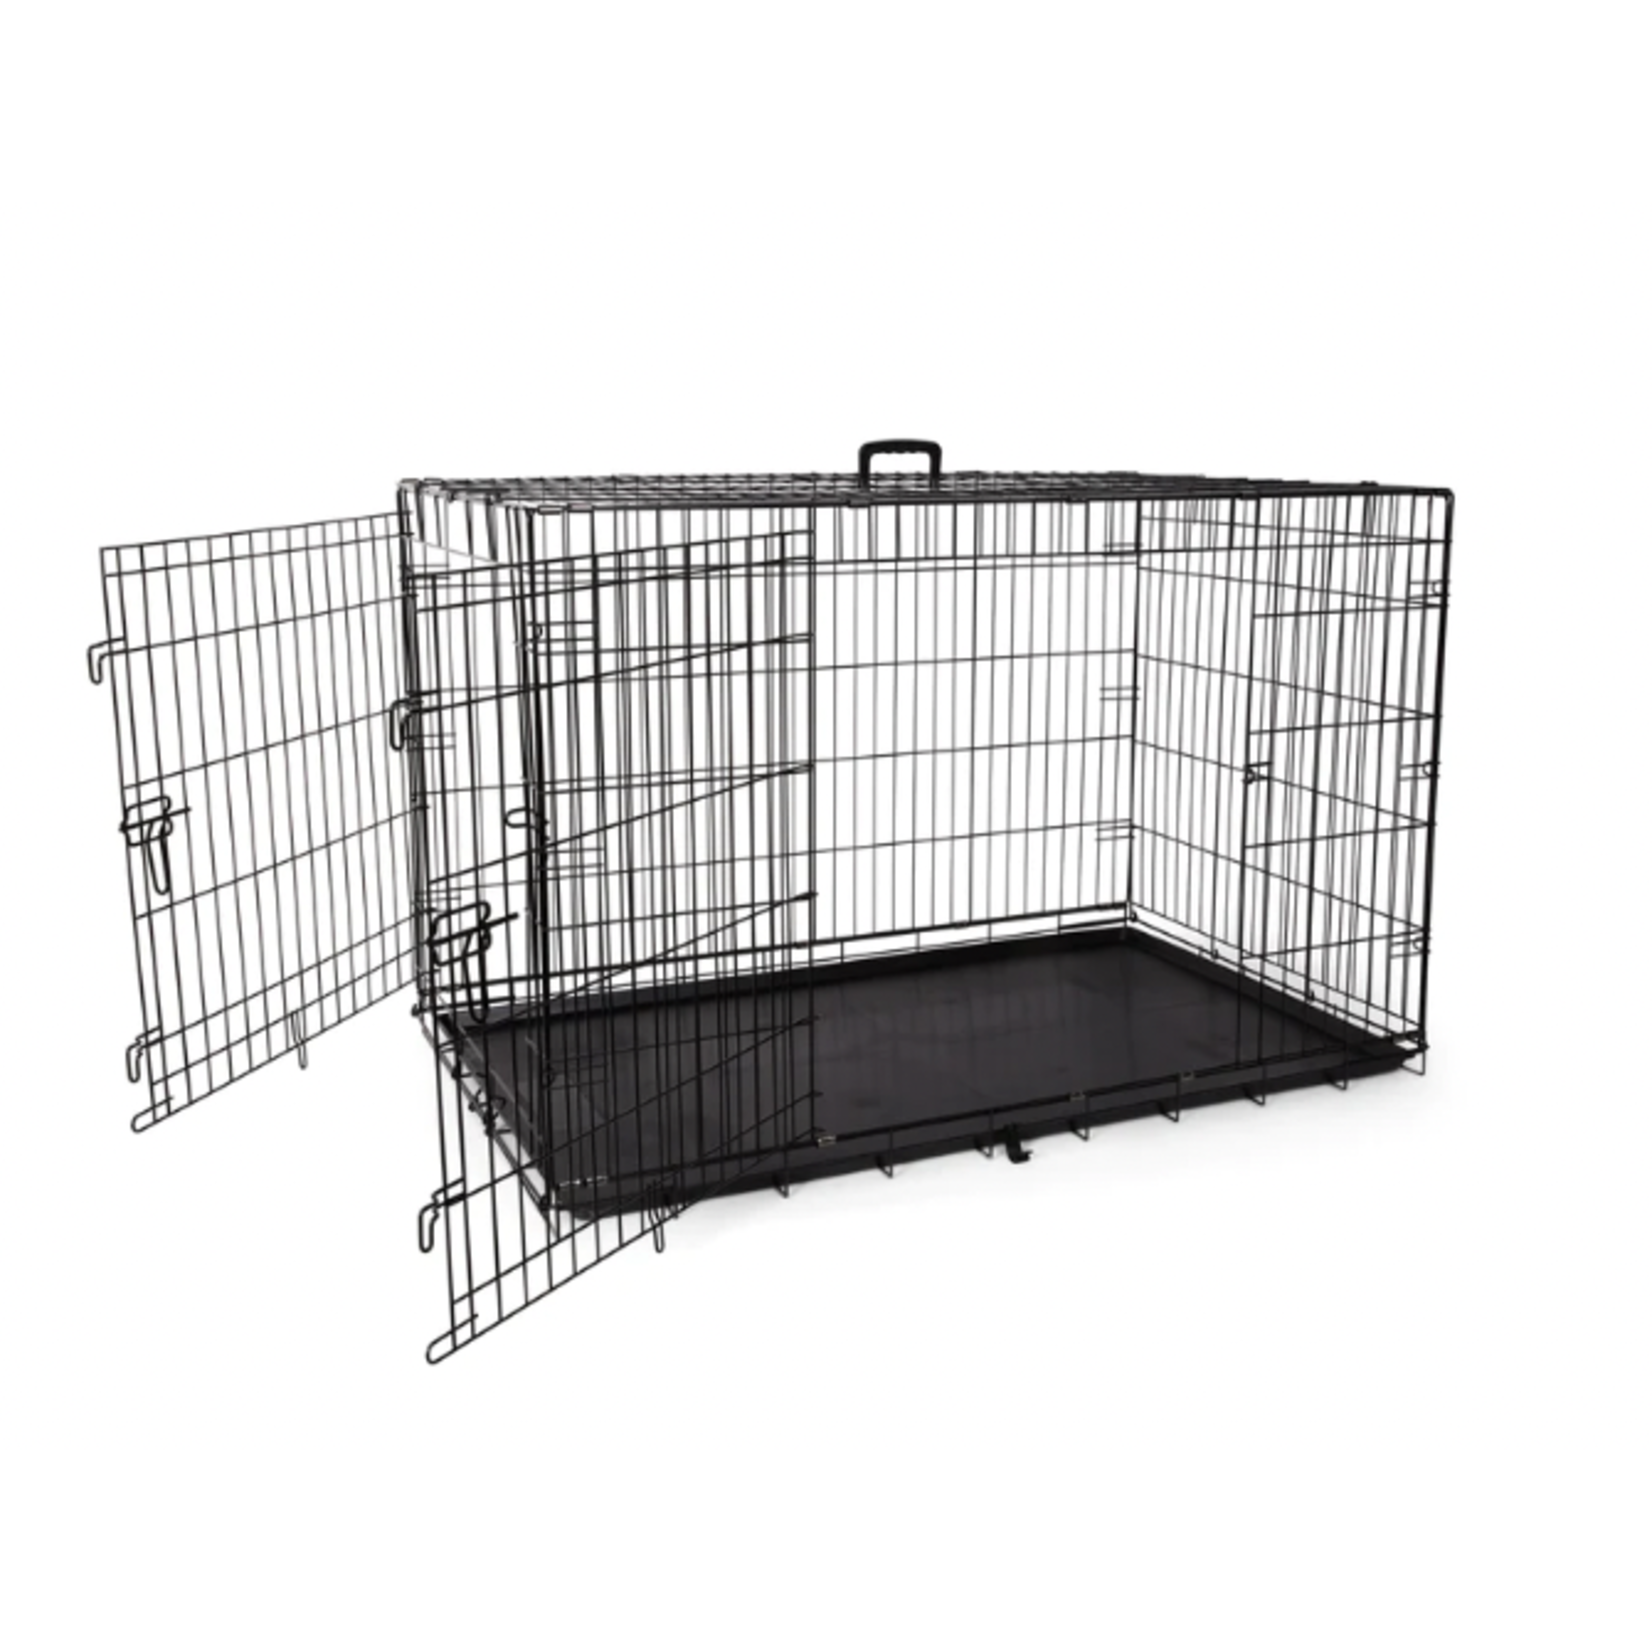 BUD-Z Bud-Z Deluxe Crate Foldable Double Doors Dog 48in